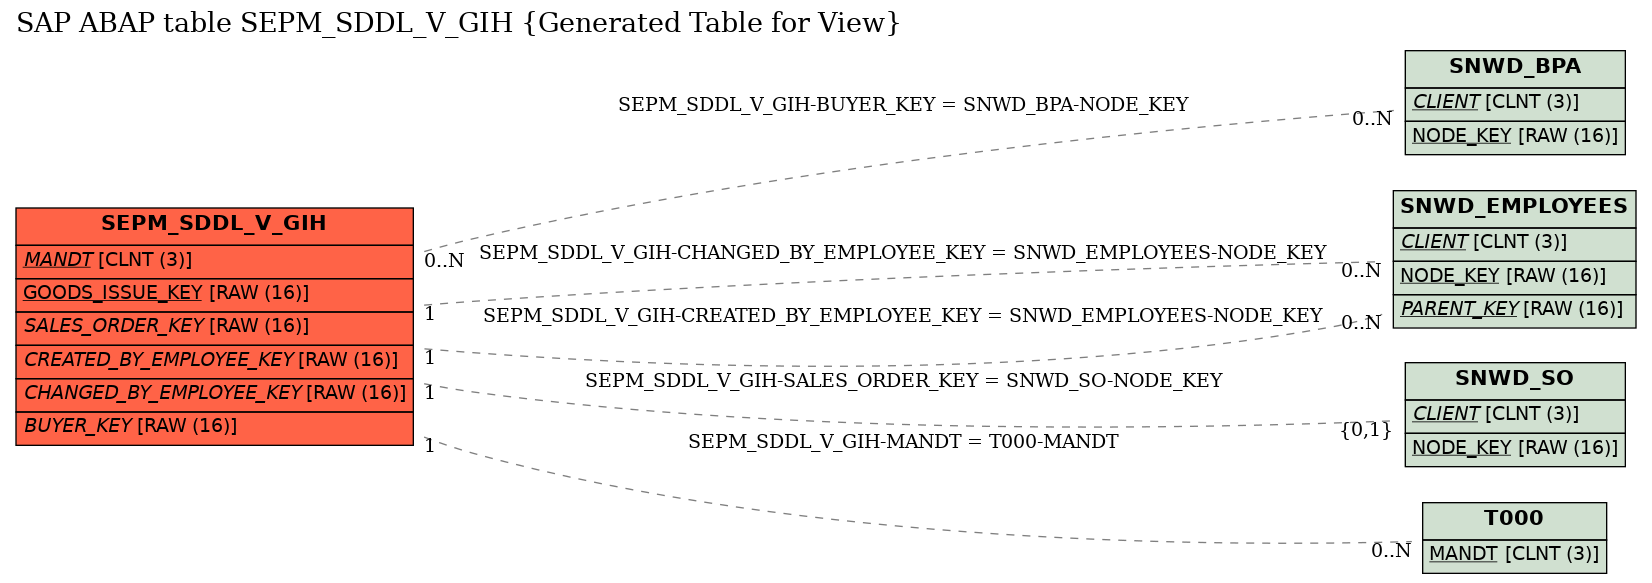 E-R Diagram for table SEPM_SDDL_V_GIH (Generated Table for View)